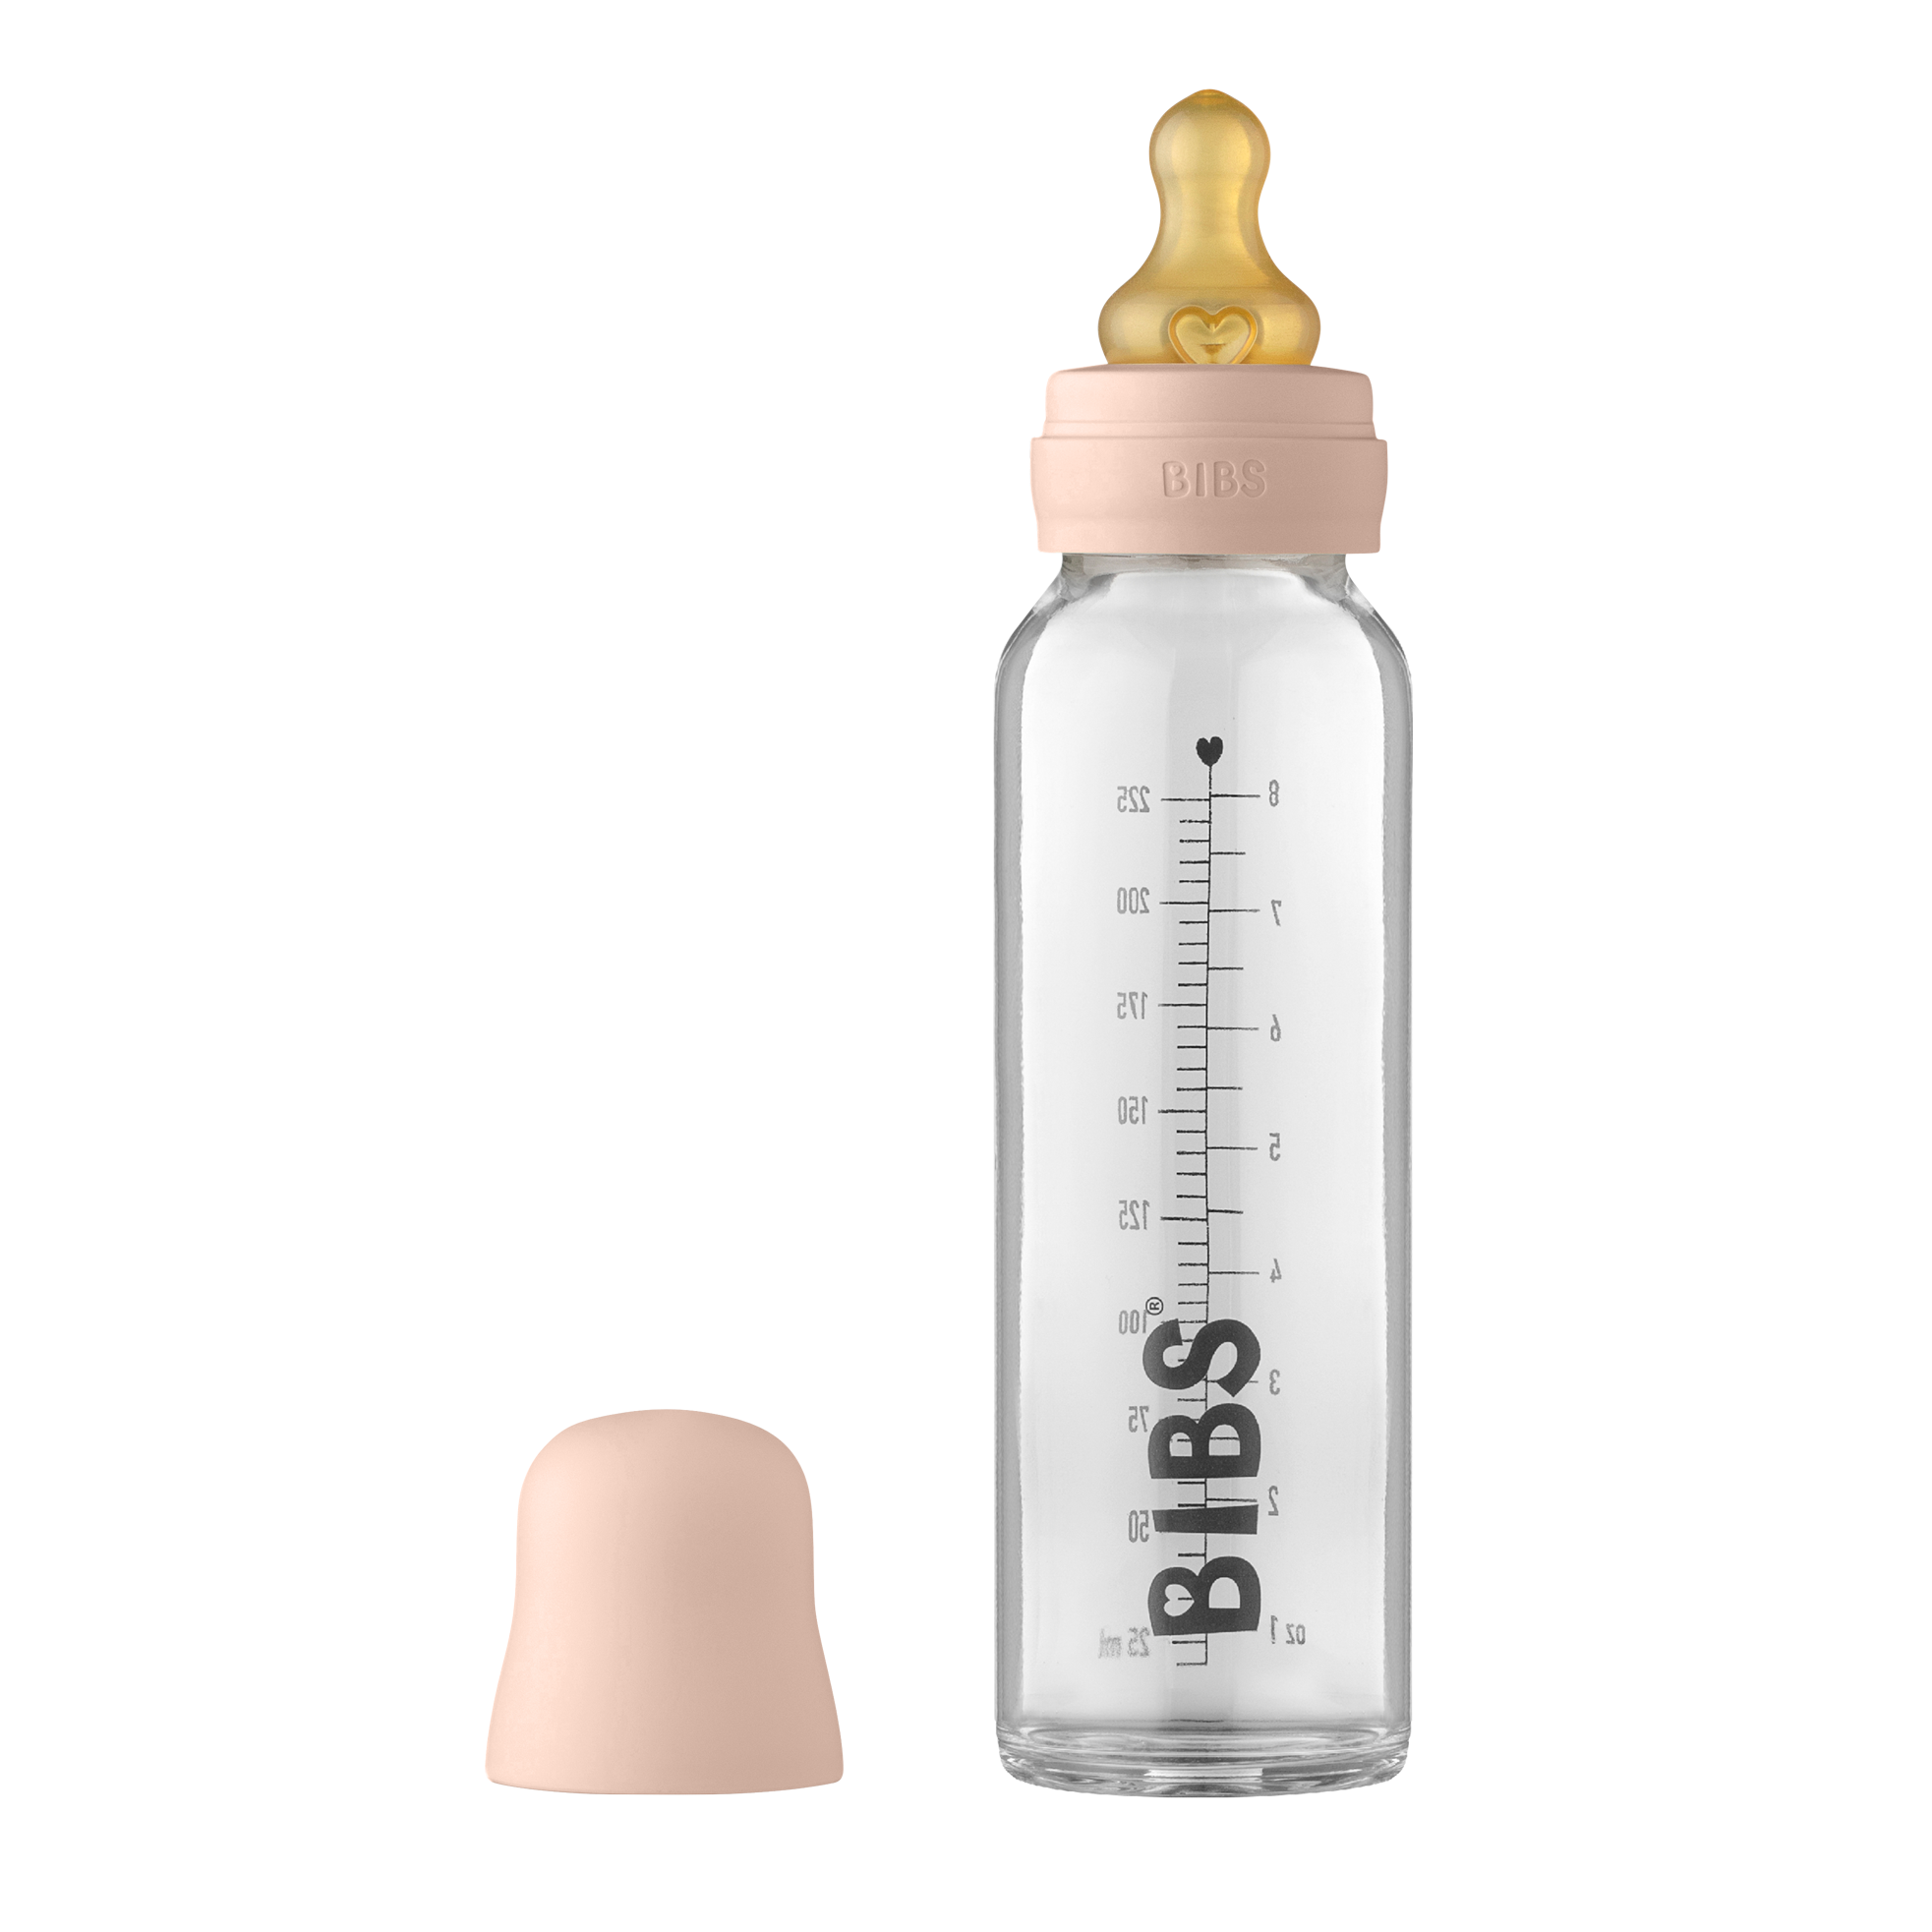 Bibs glass baby bottle - Angus and Dudley